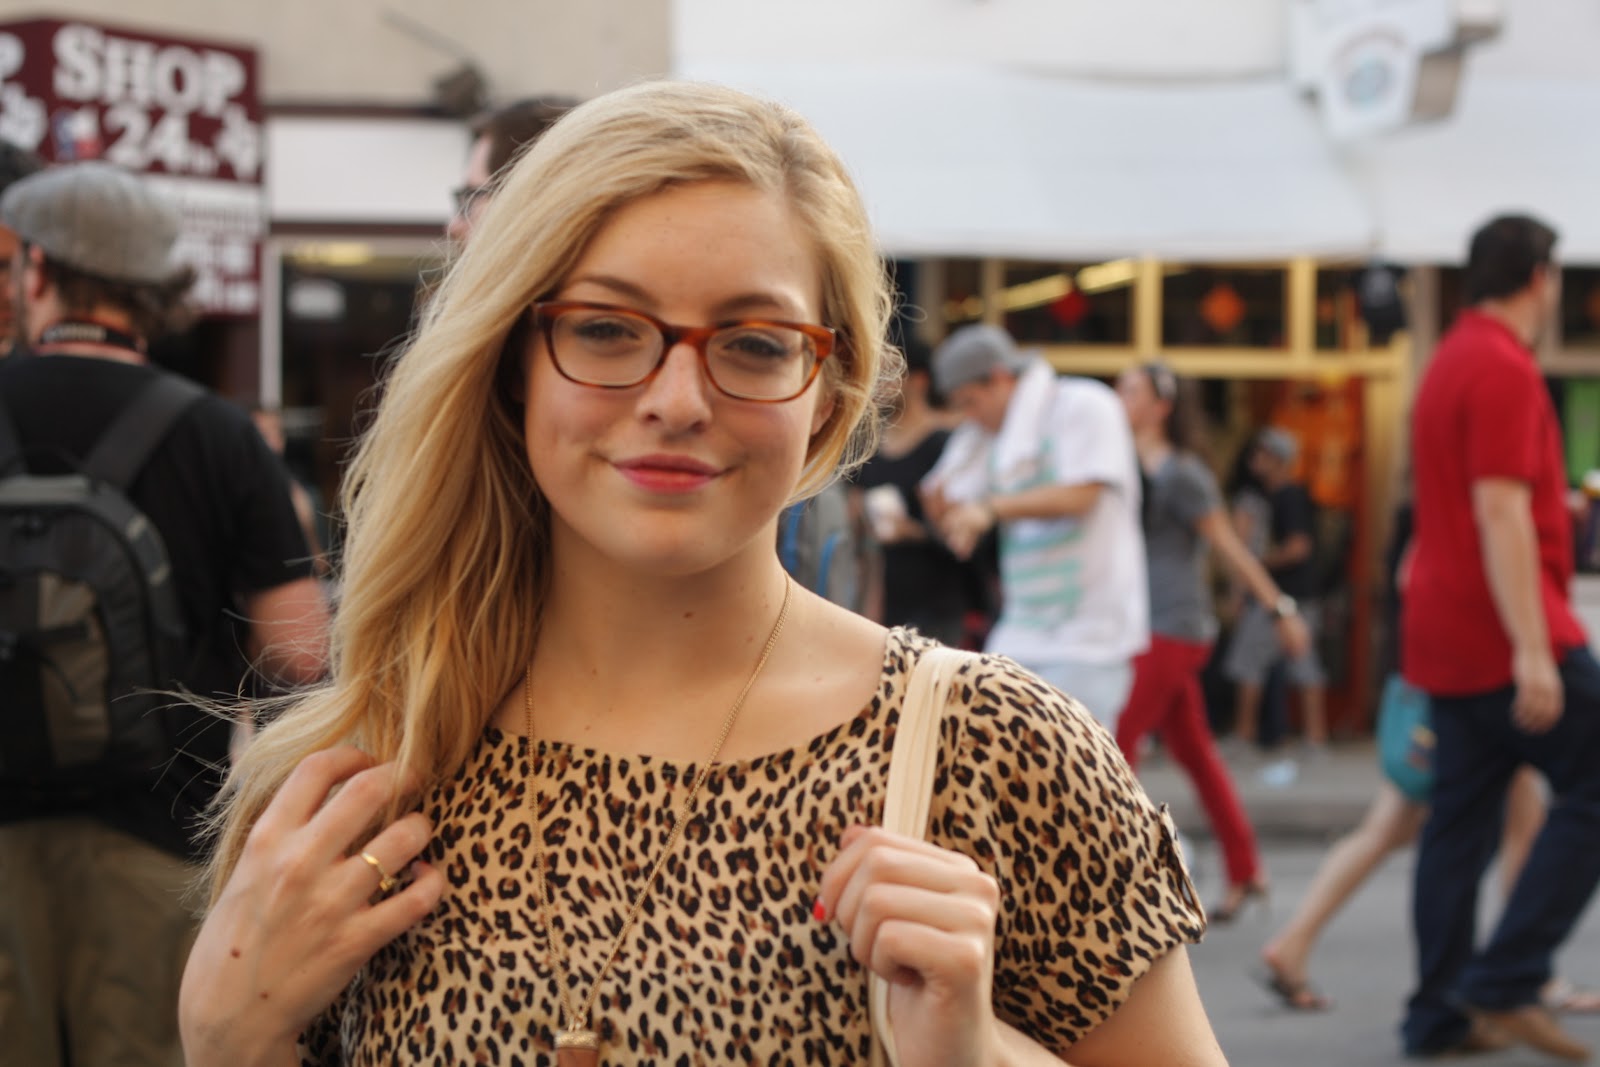 rachel at sxsw, wearing leopard top and tortoise shell glasses